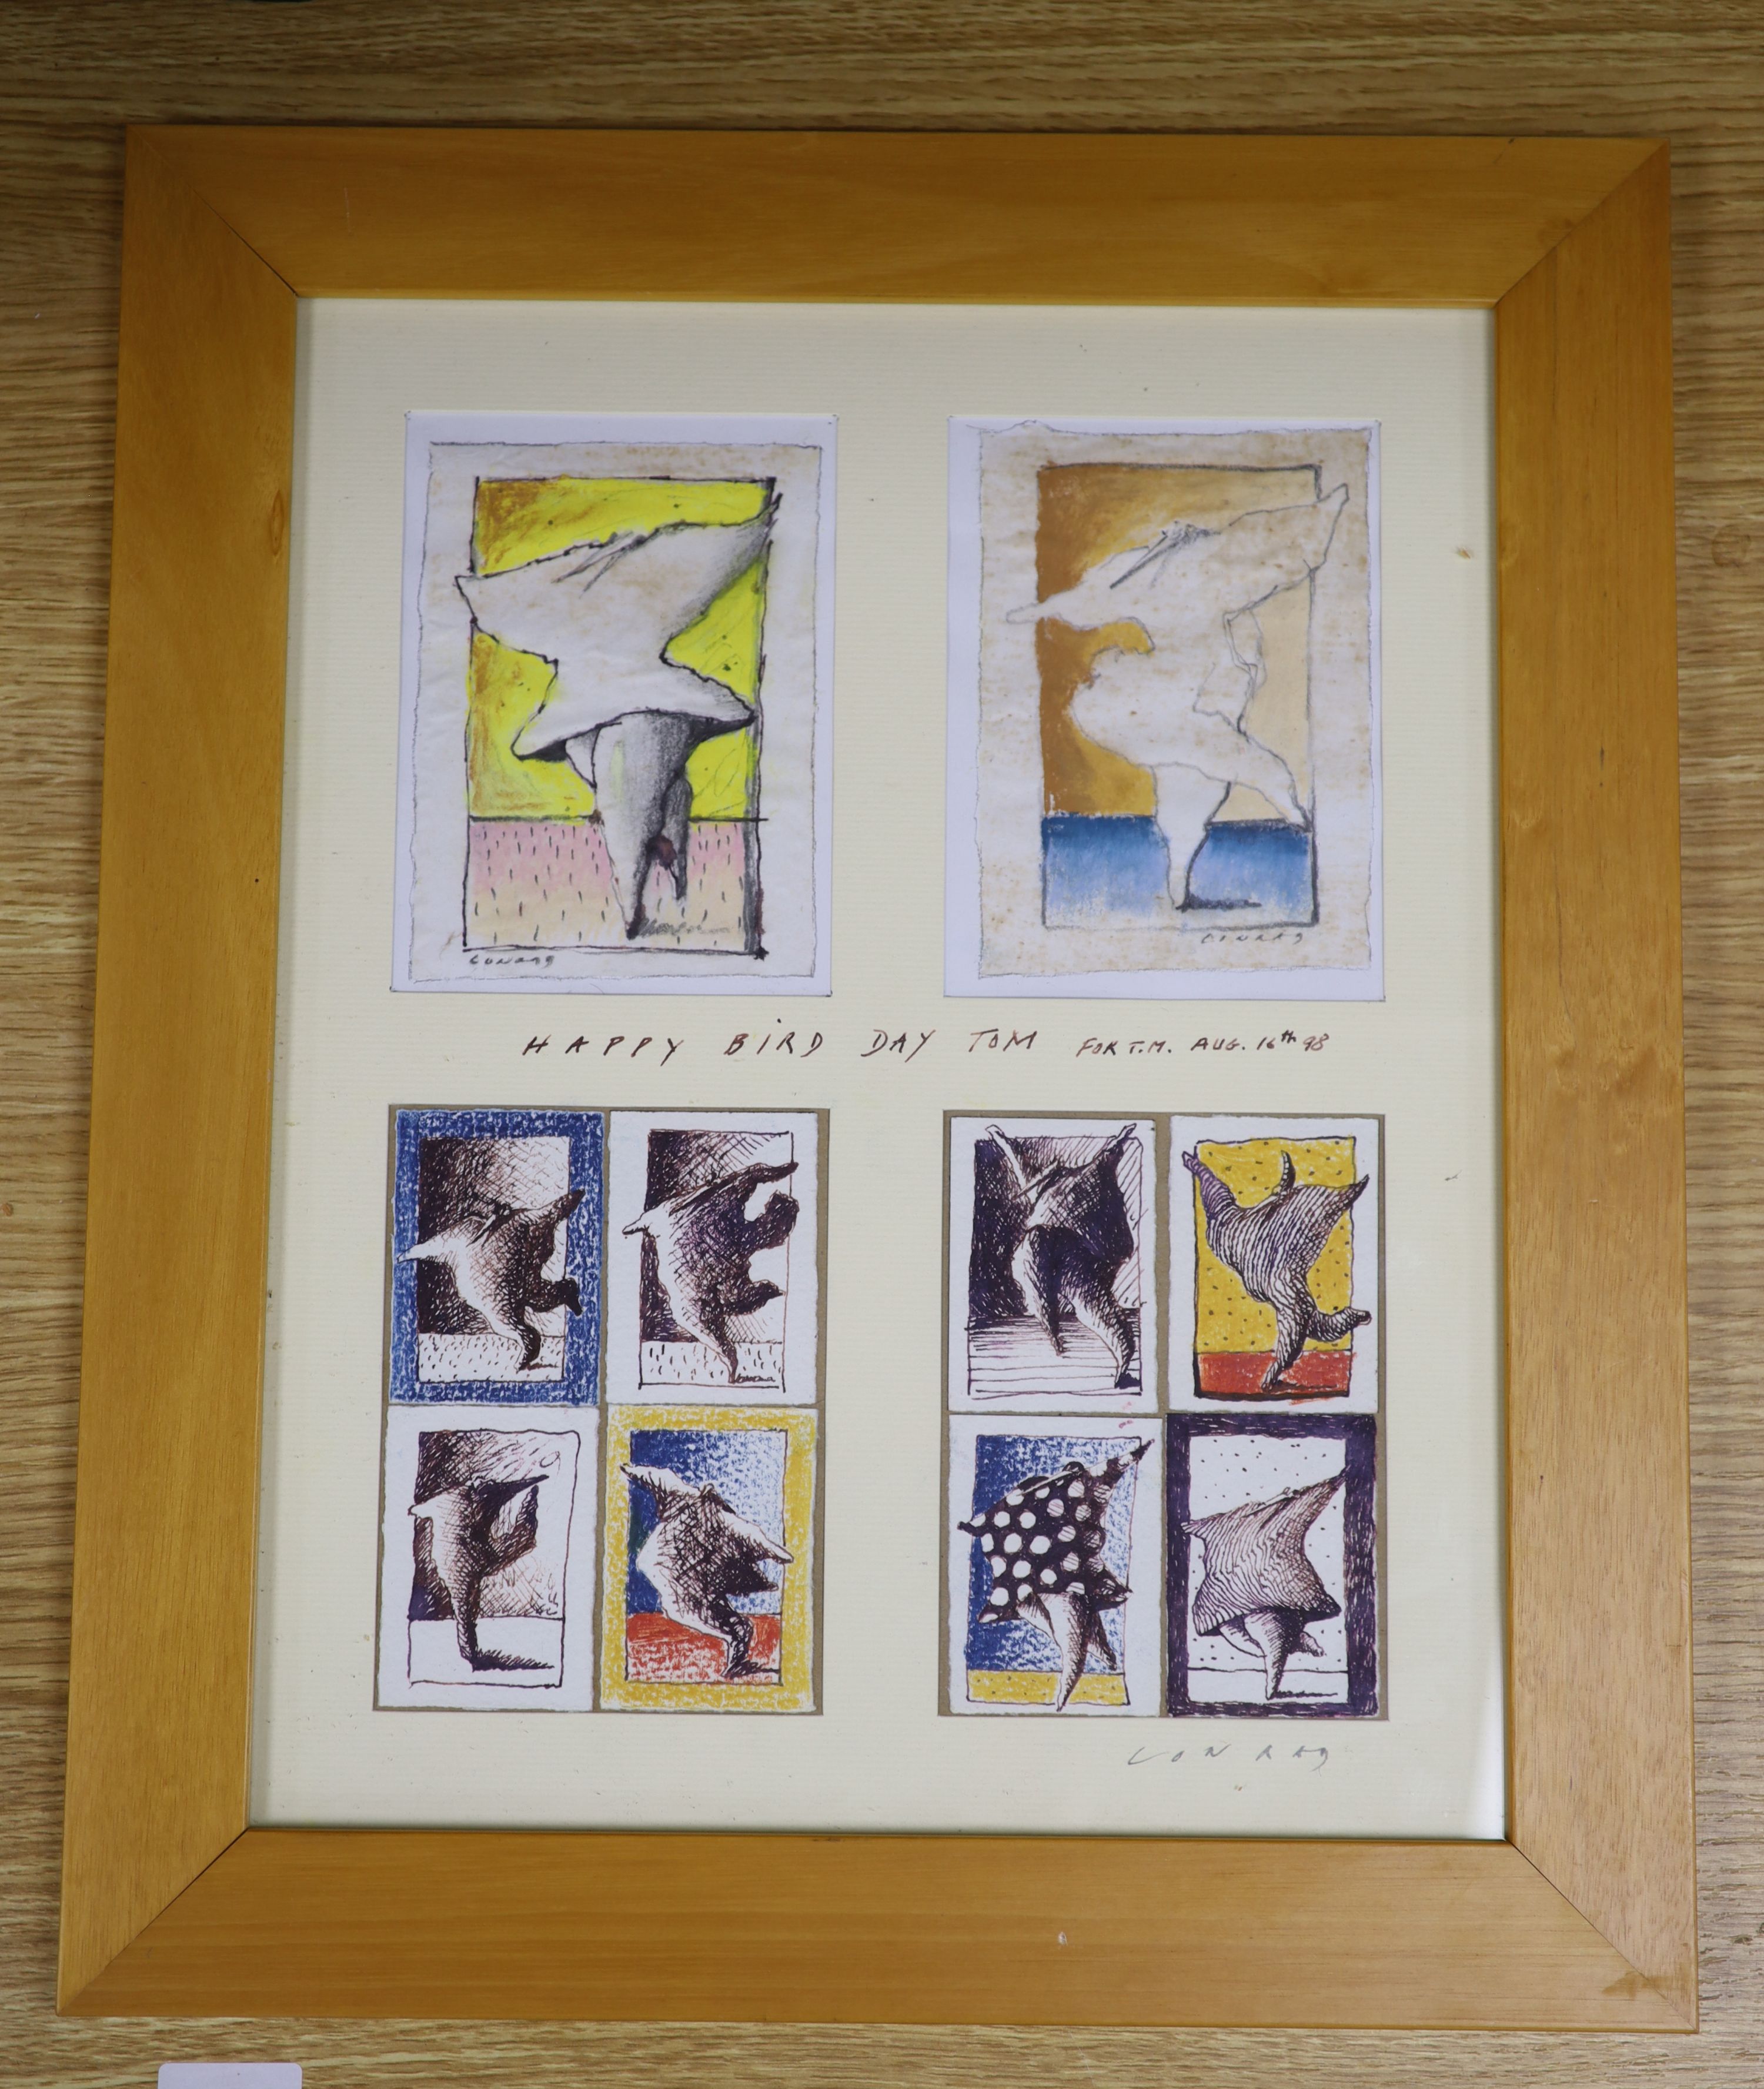 Patrick Conrad (1945-), four watercolours, 'Happy Bird Day', signed and inscribed 'To Tom', each 13 x 10cm, framed as one